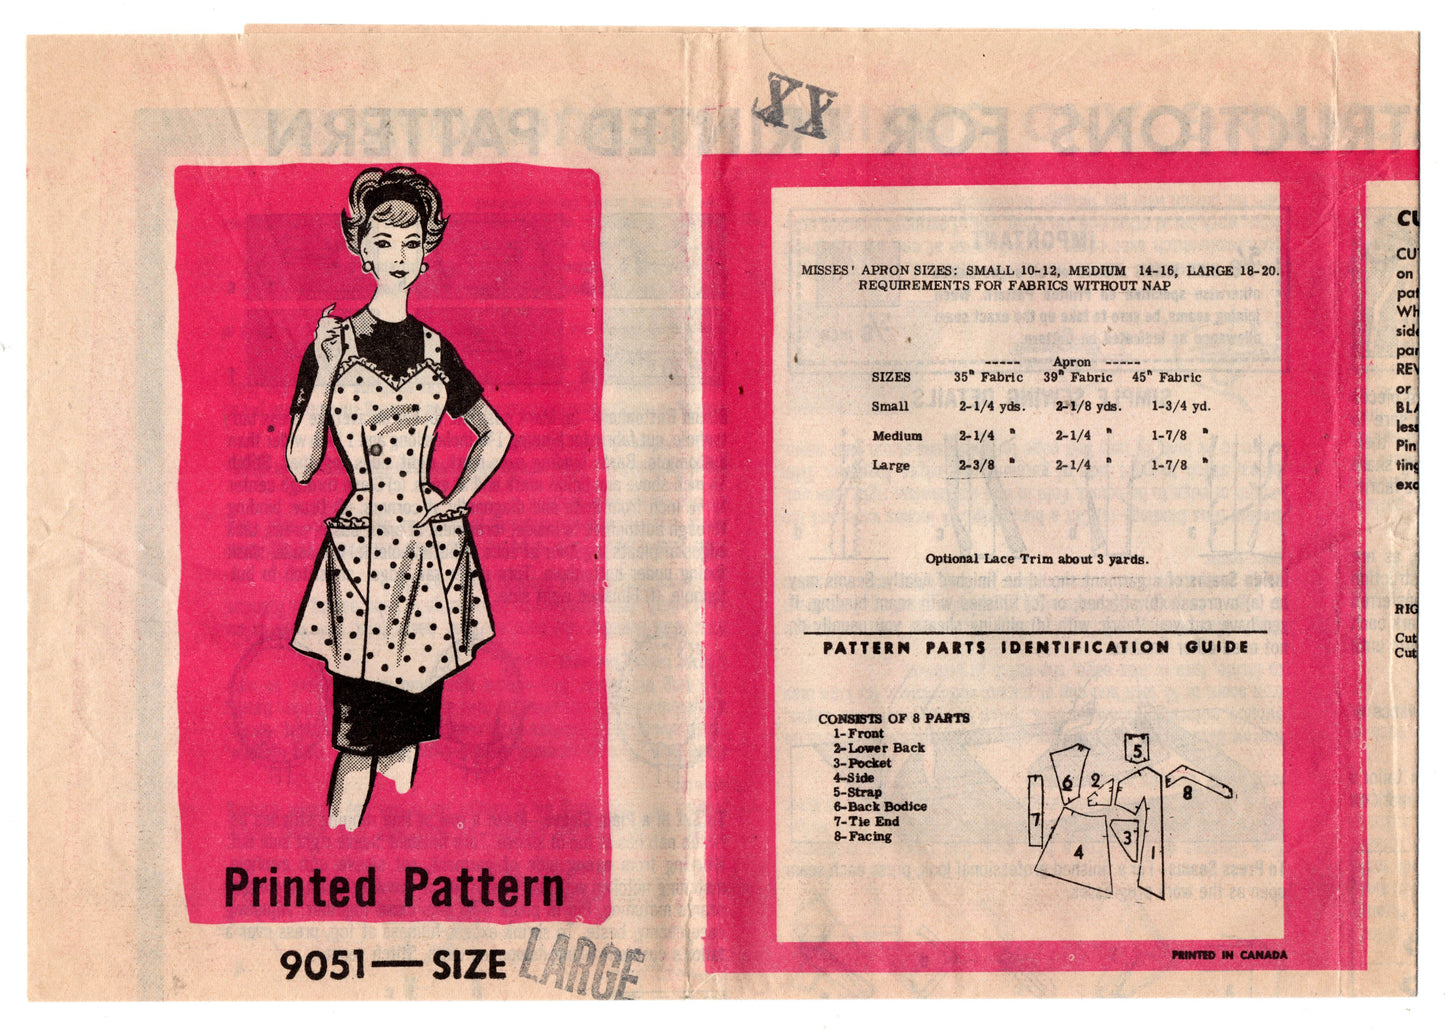 Mail Order 9051 Womens Full Kitchen Apron with Pockets 1960s Vintage Sewing Pattern LARGE Bust 38 - 40 inches UNCUT Factory Folded